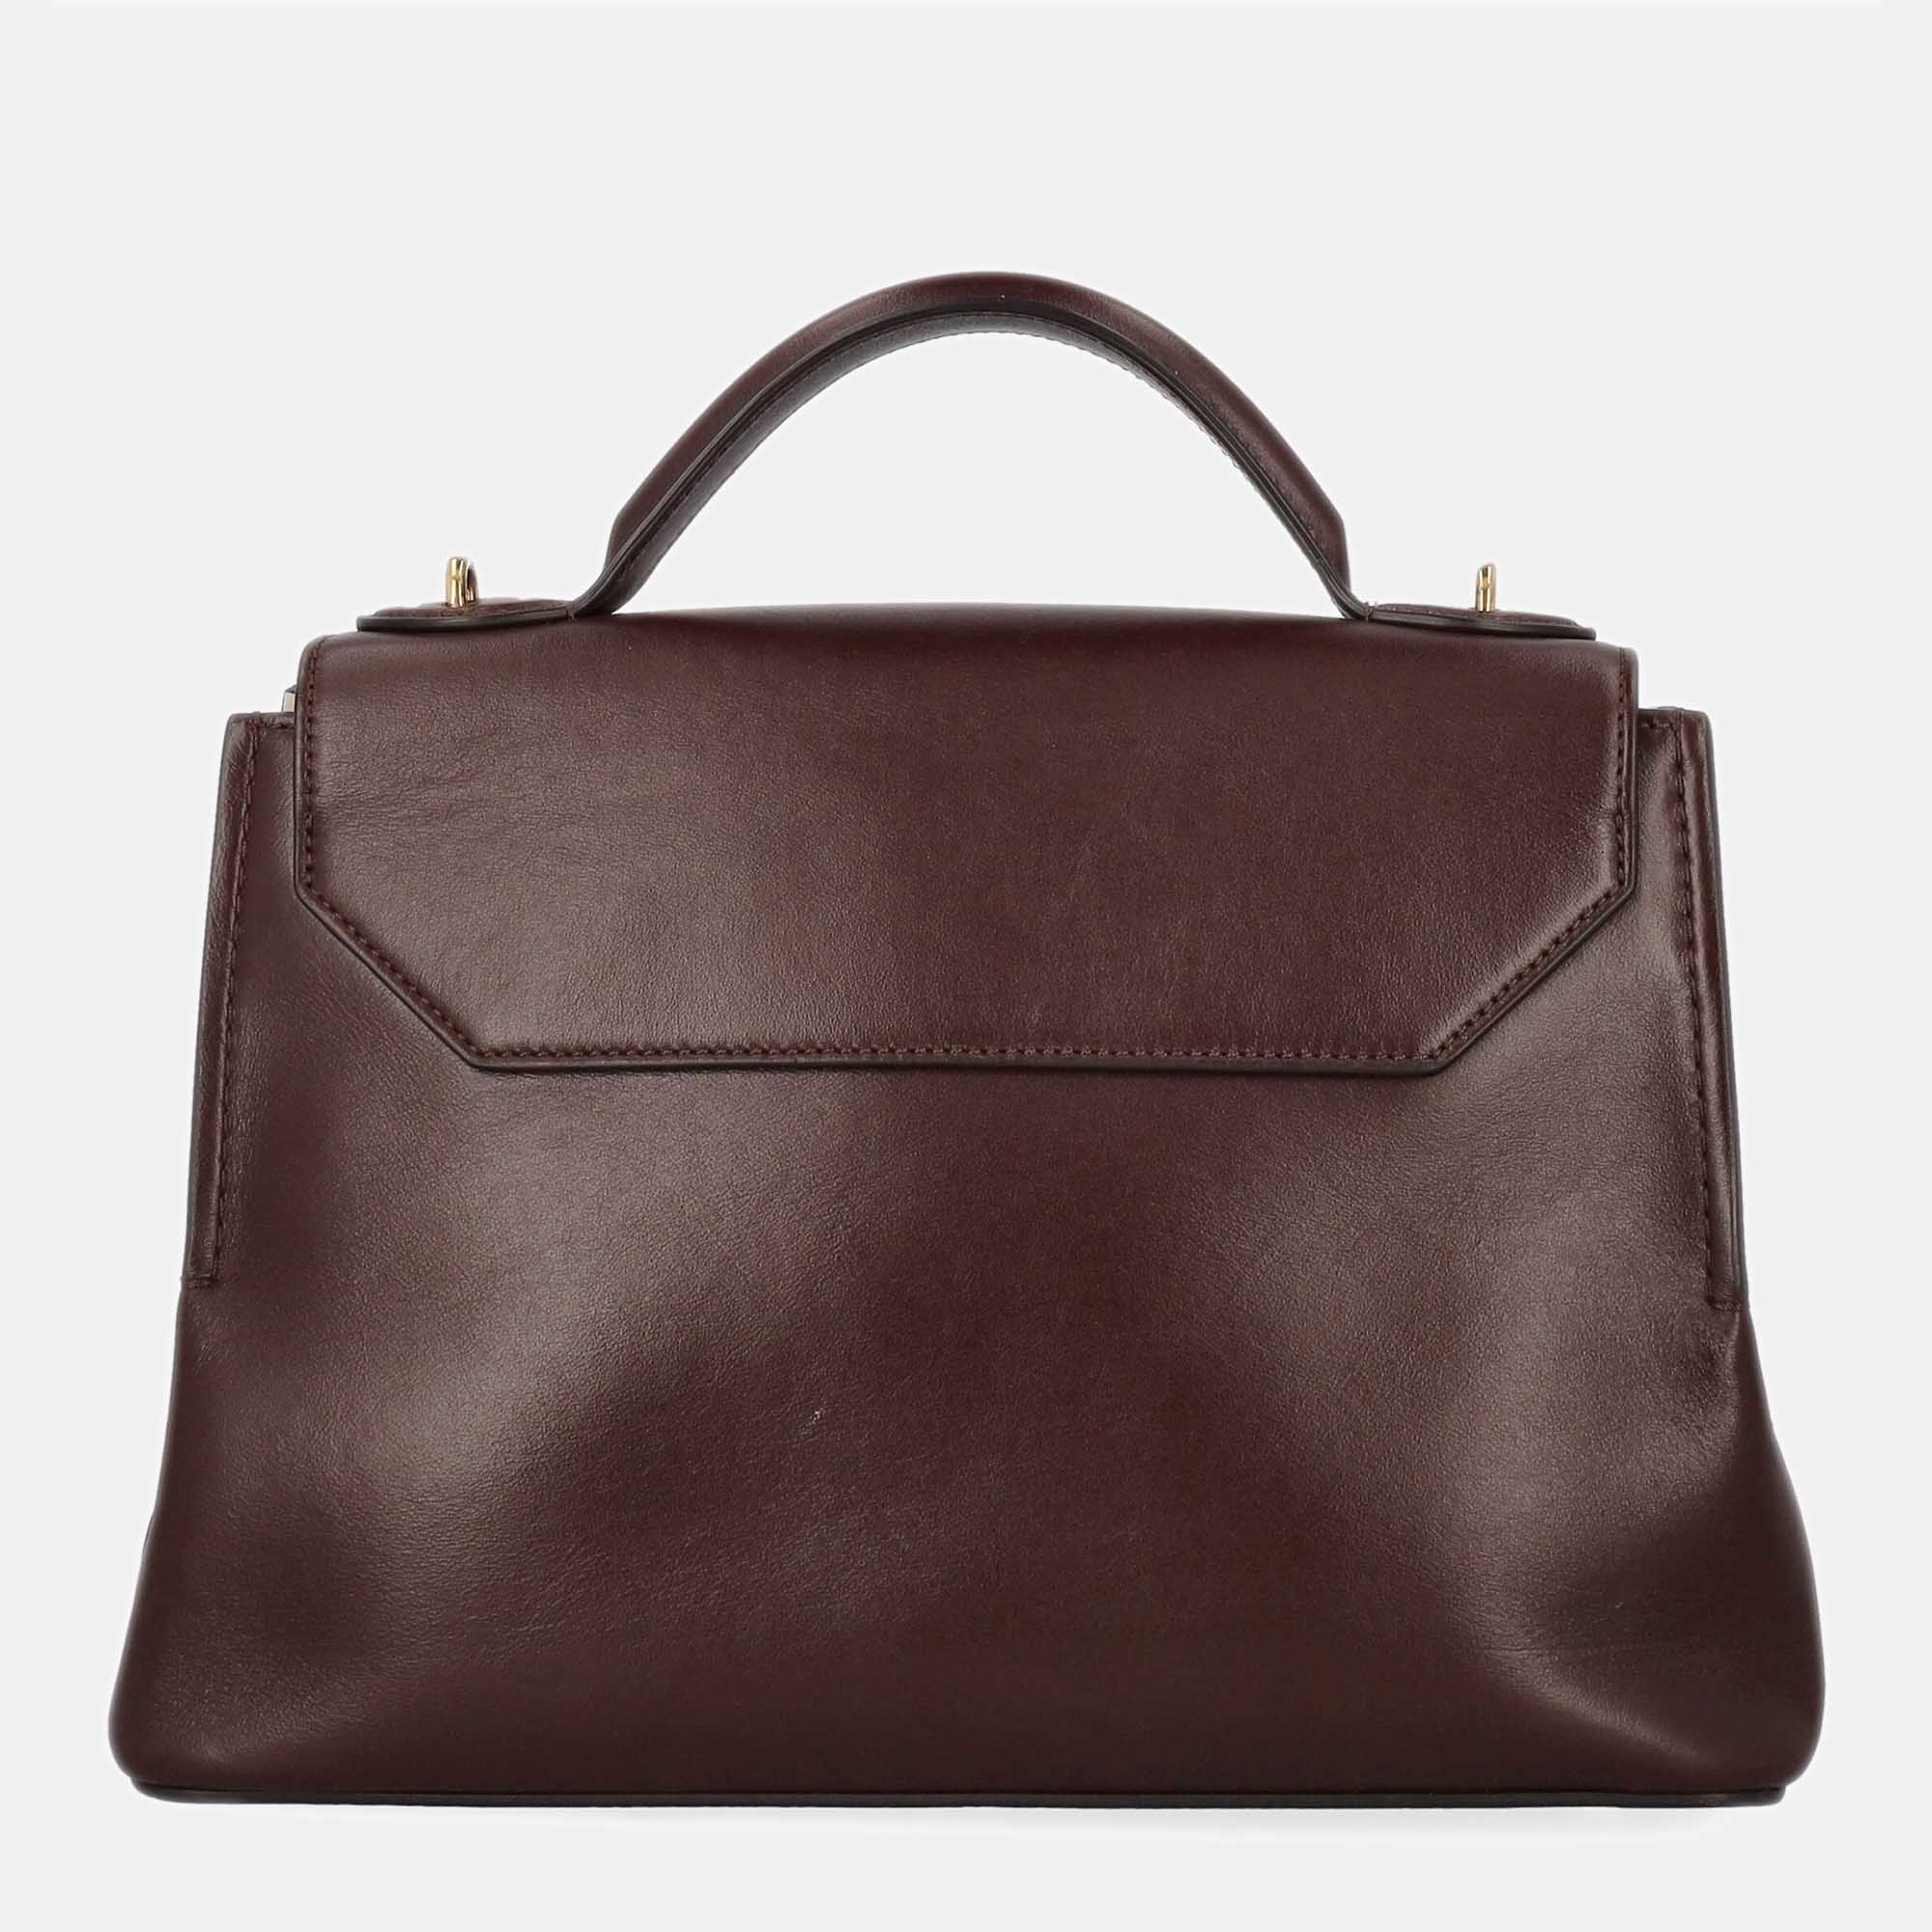 Mulberry  Women's Leather Tote Bag - Brown - One Size